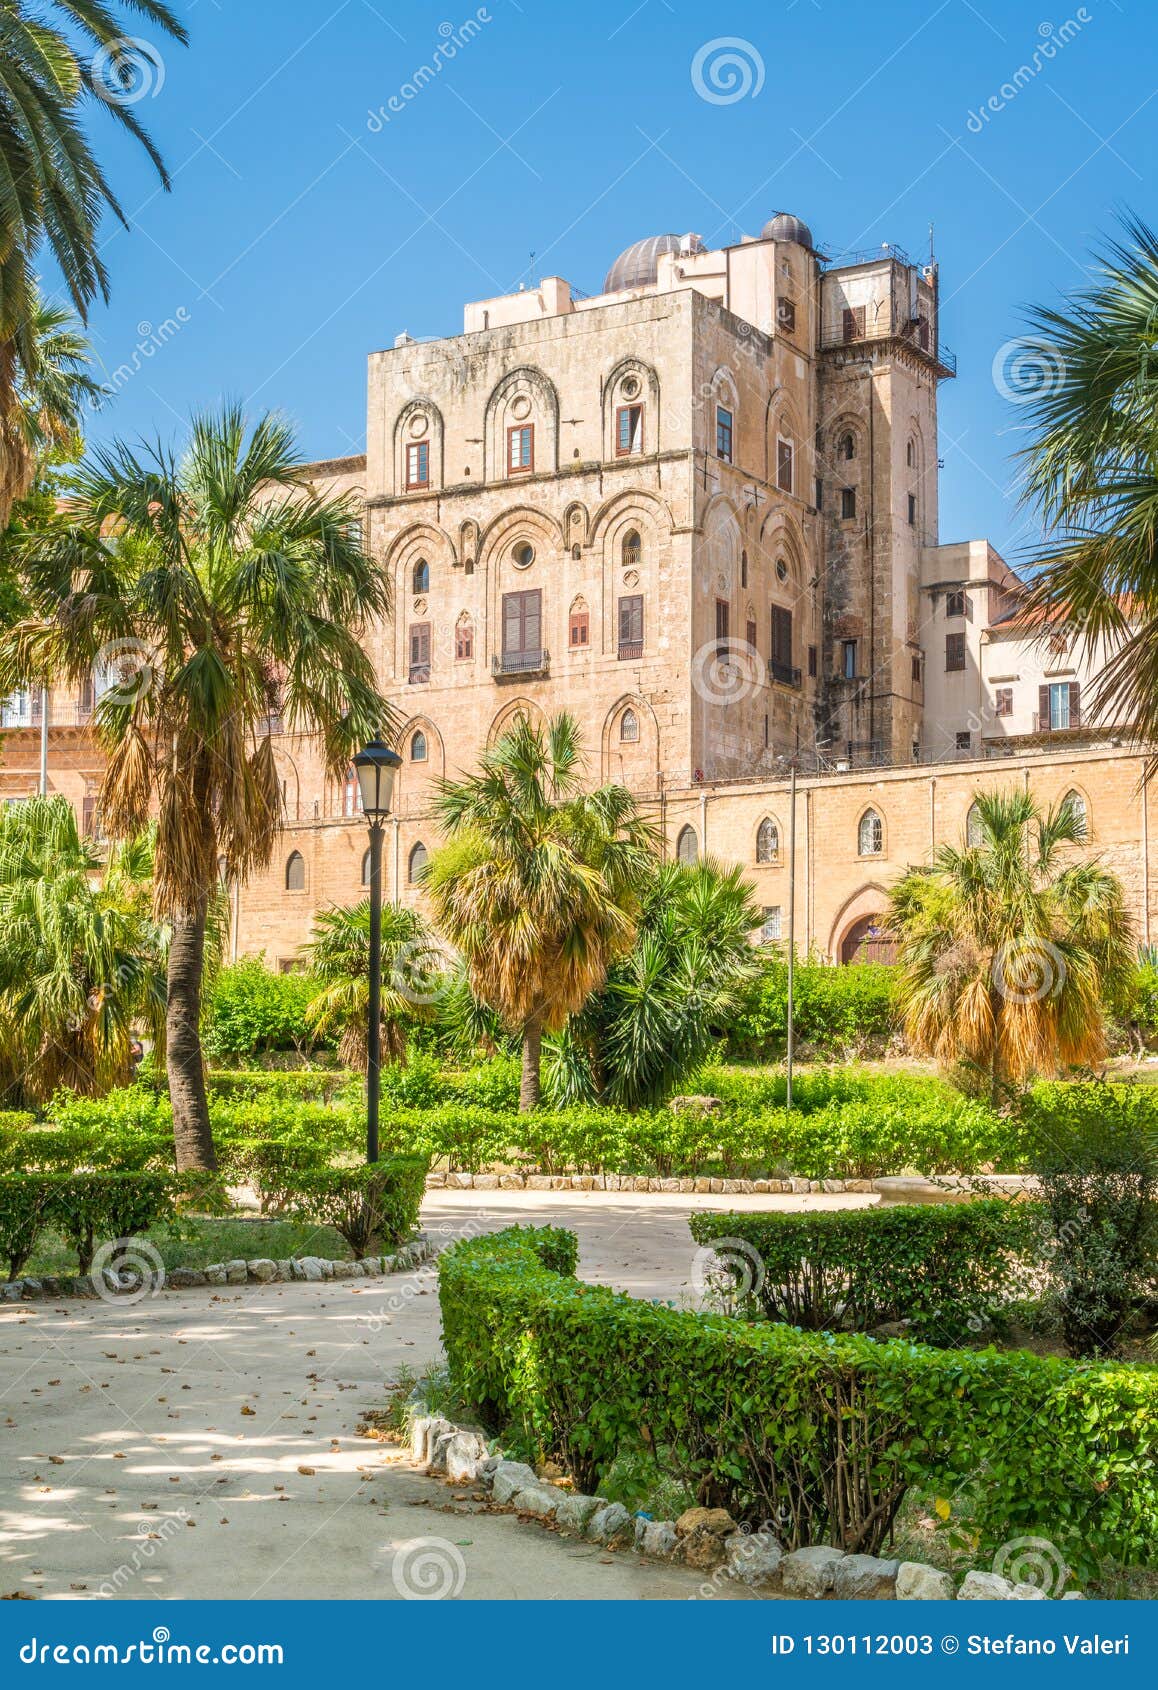 palazzo dei normanni palace of the normans or royal palace of palermo. sicily, southern italy.